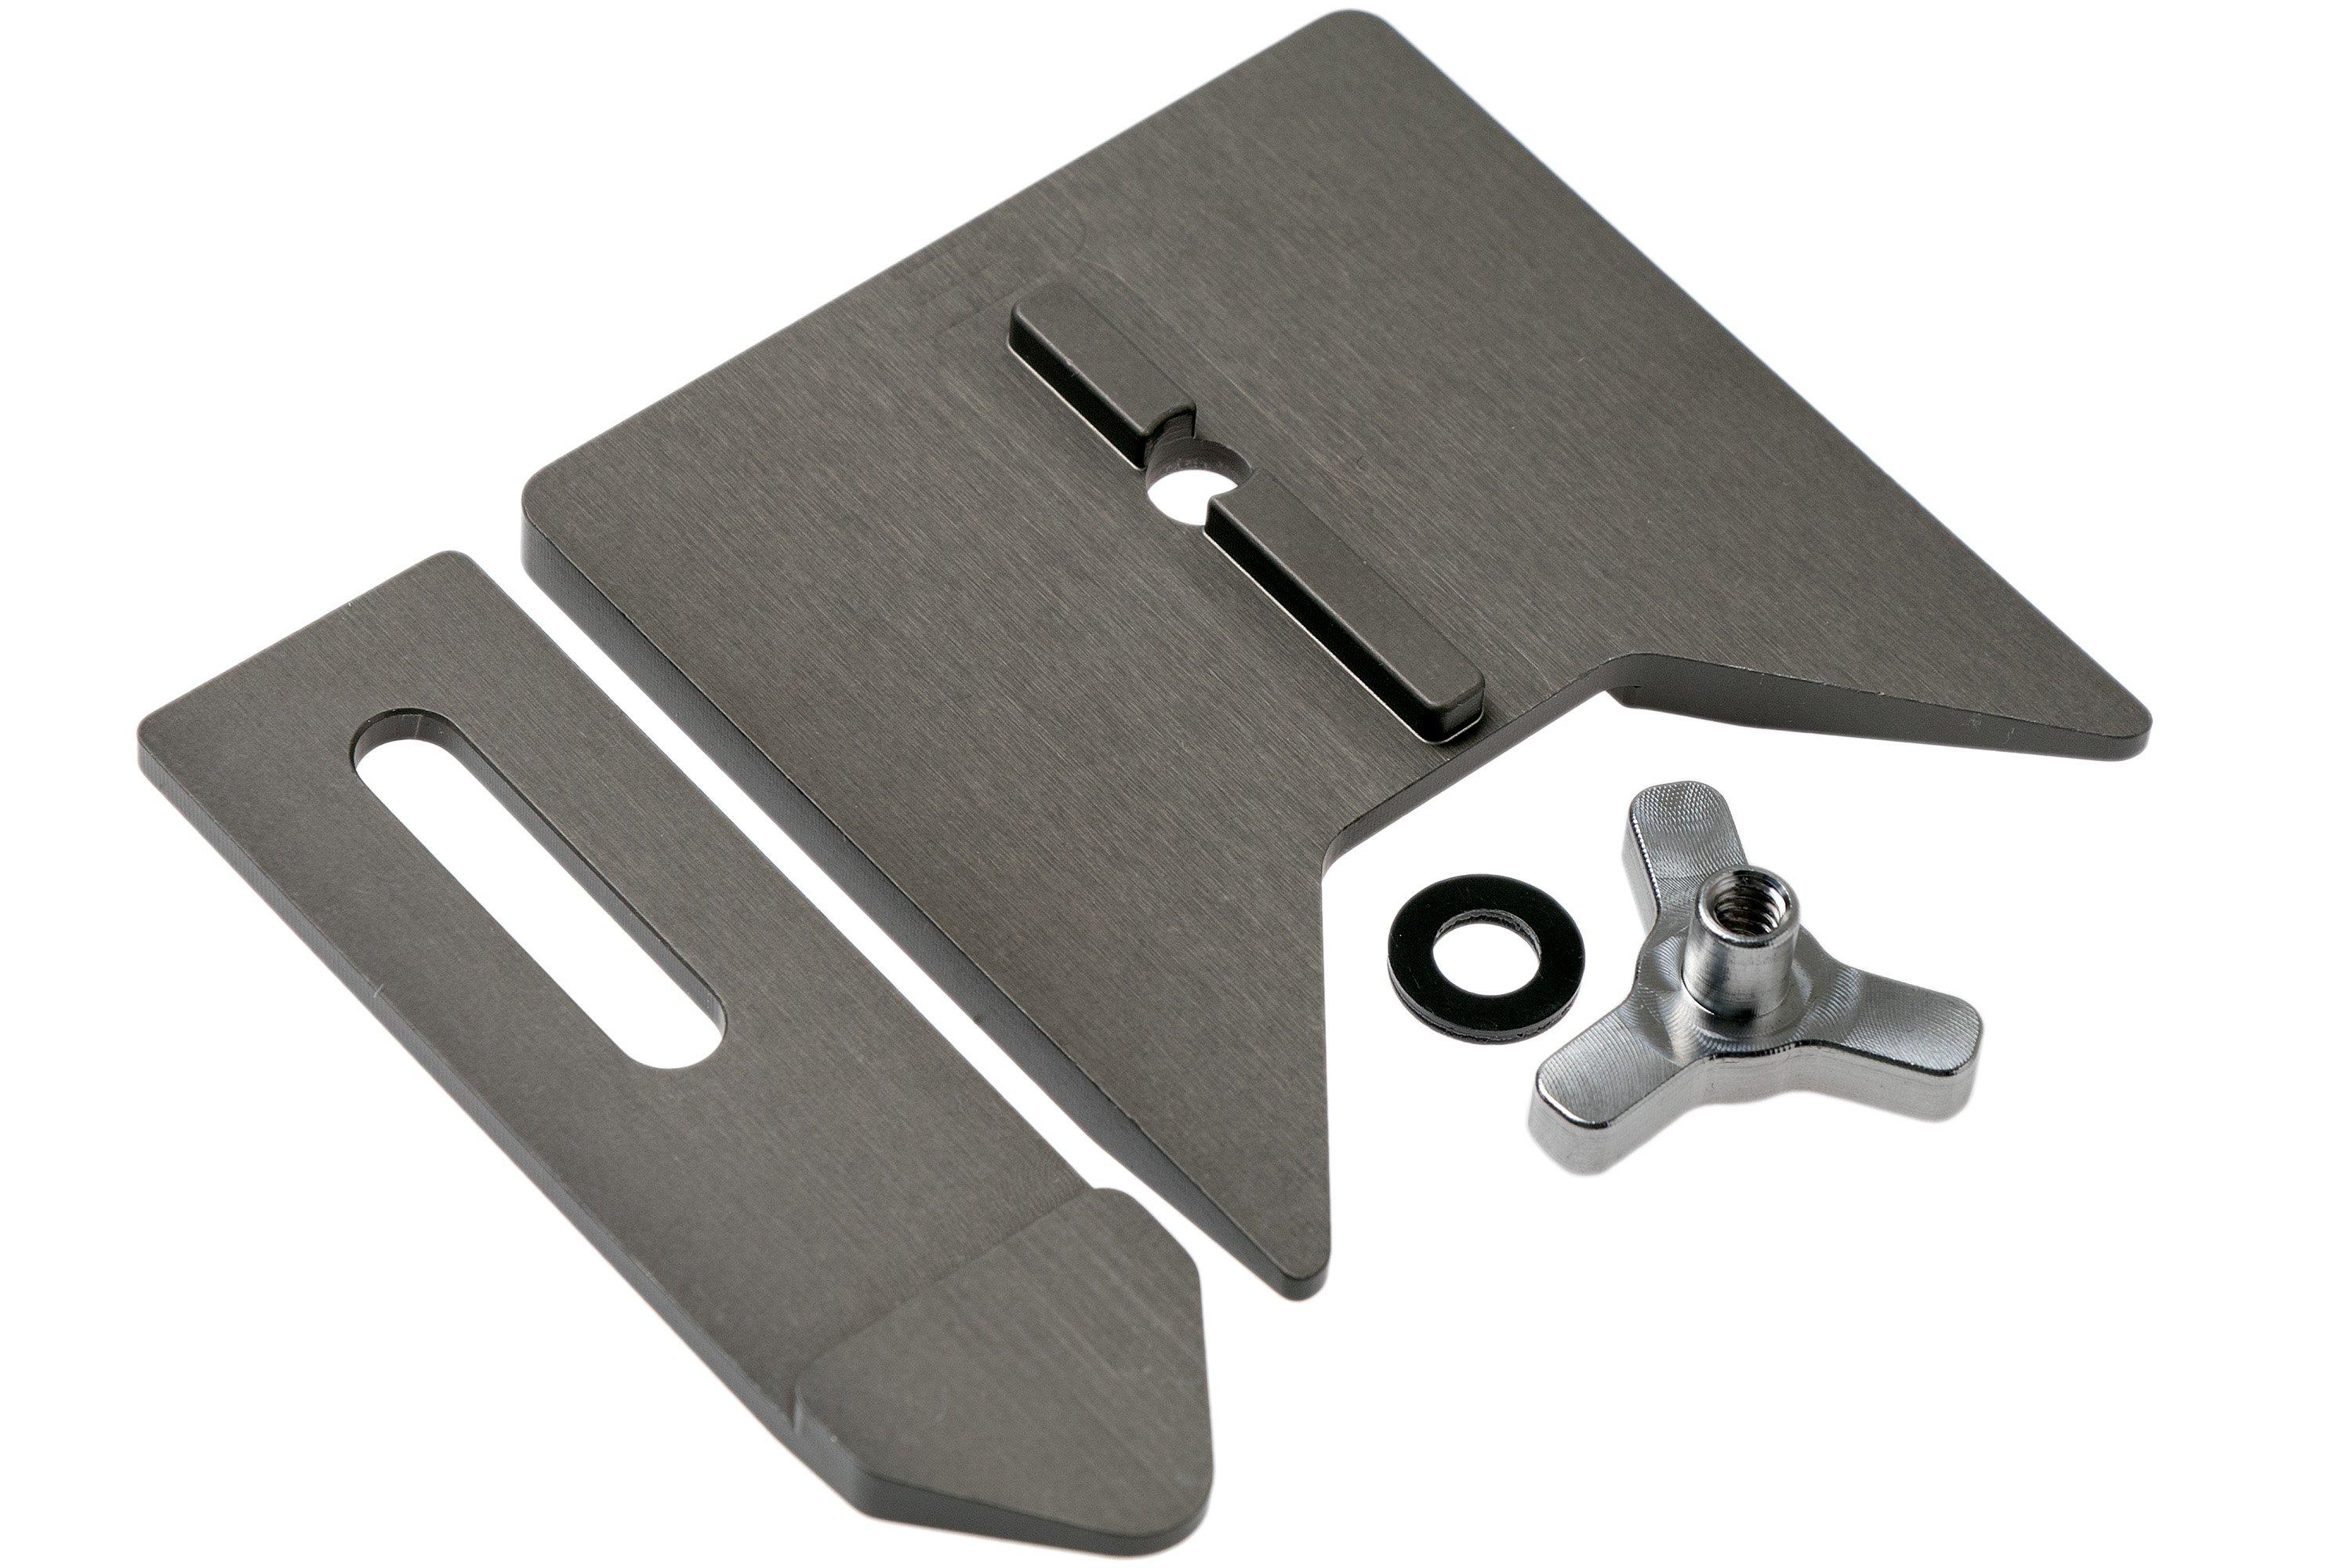  Edge Pro Apex 4 Knife Sharpening System : Tools & Home